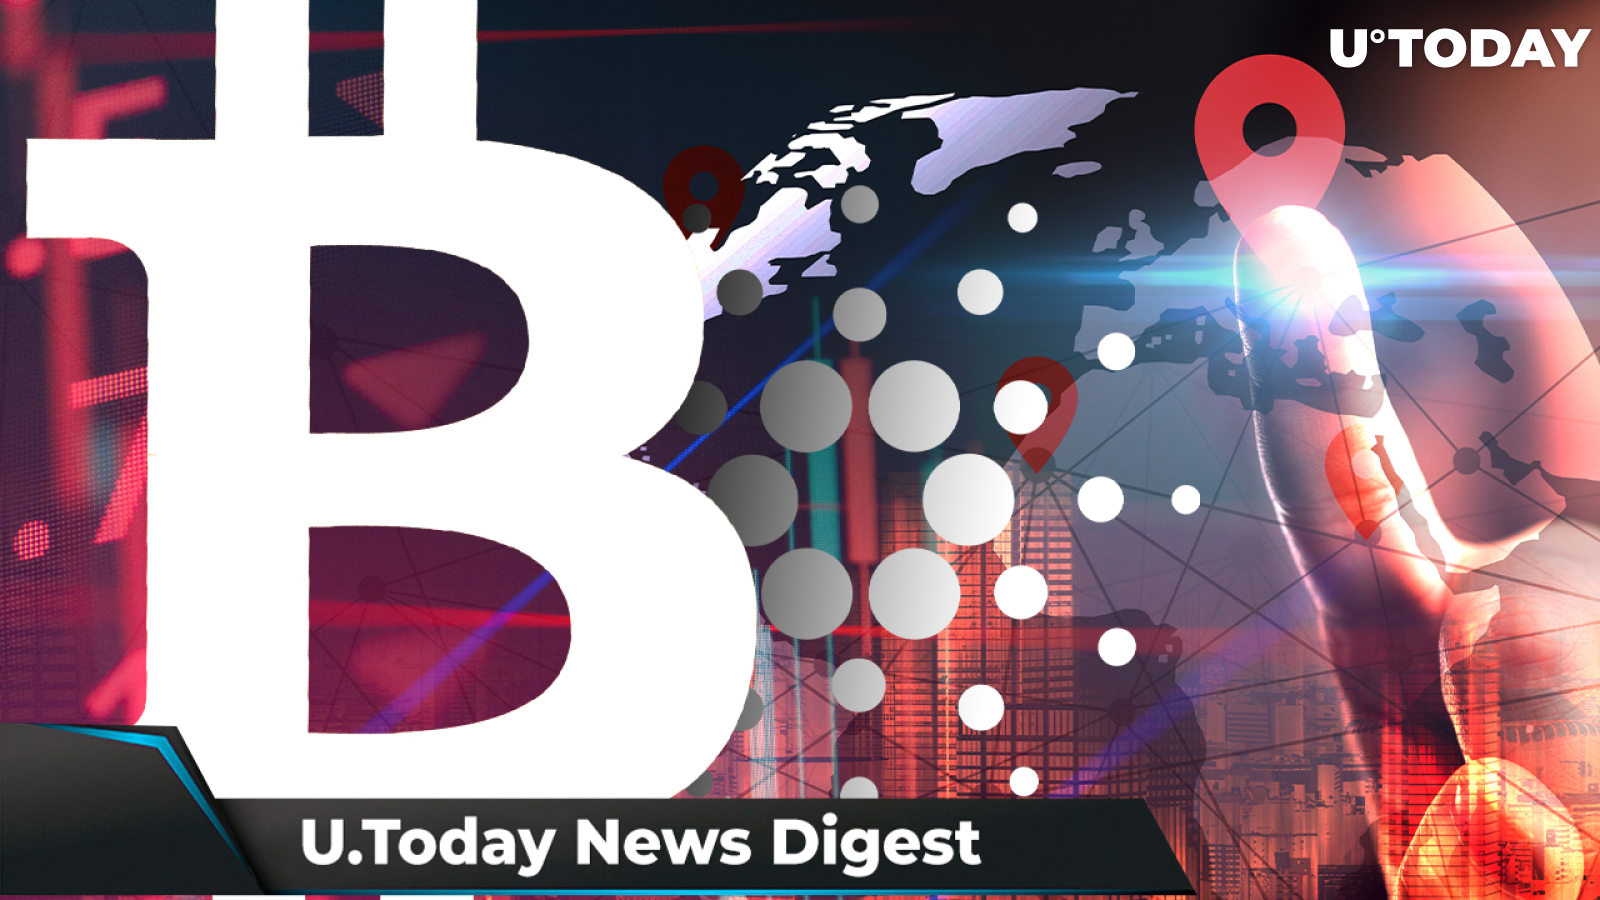 Pattern Predicted LUNA Crash, 3 Metrics Suggest BTC Has Strong Support, Hoskinson Offers Buterin to Come to Cardano: Crypto News Digest by U.Today